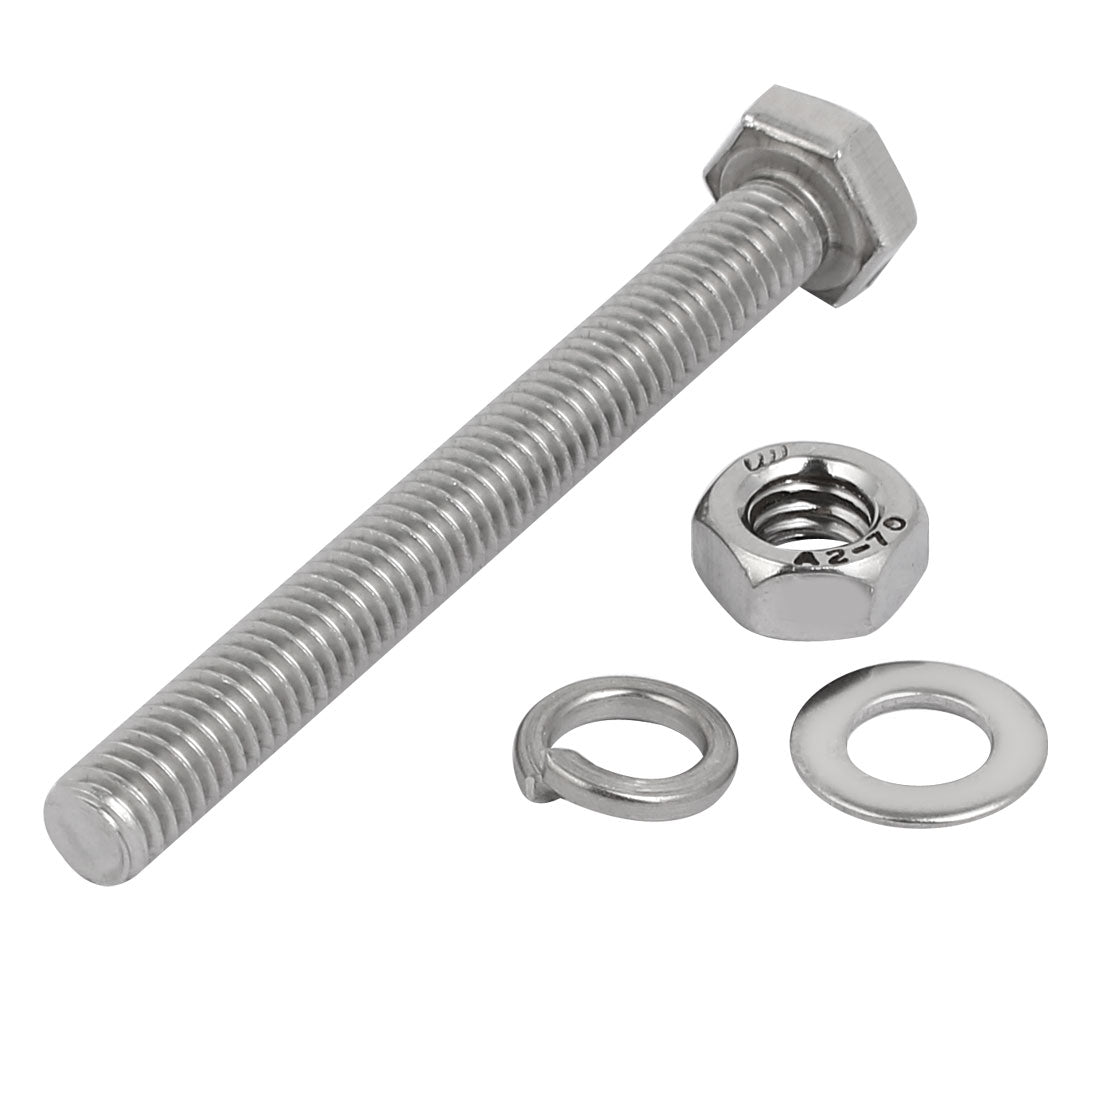 uxcell Uxcell 10pcs 304 Stainless Steel M6x60mm Hex Bolts w Nuts and Washers Assortment Kit